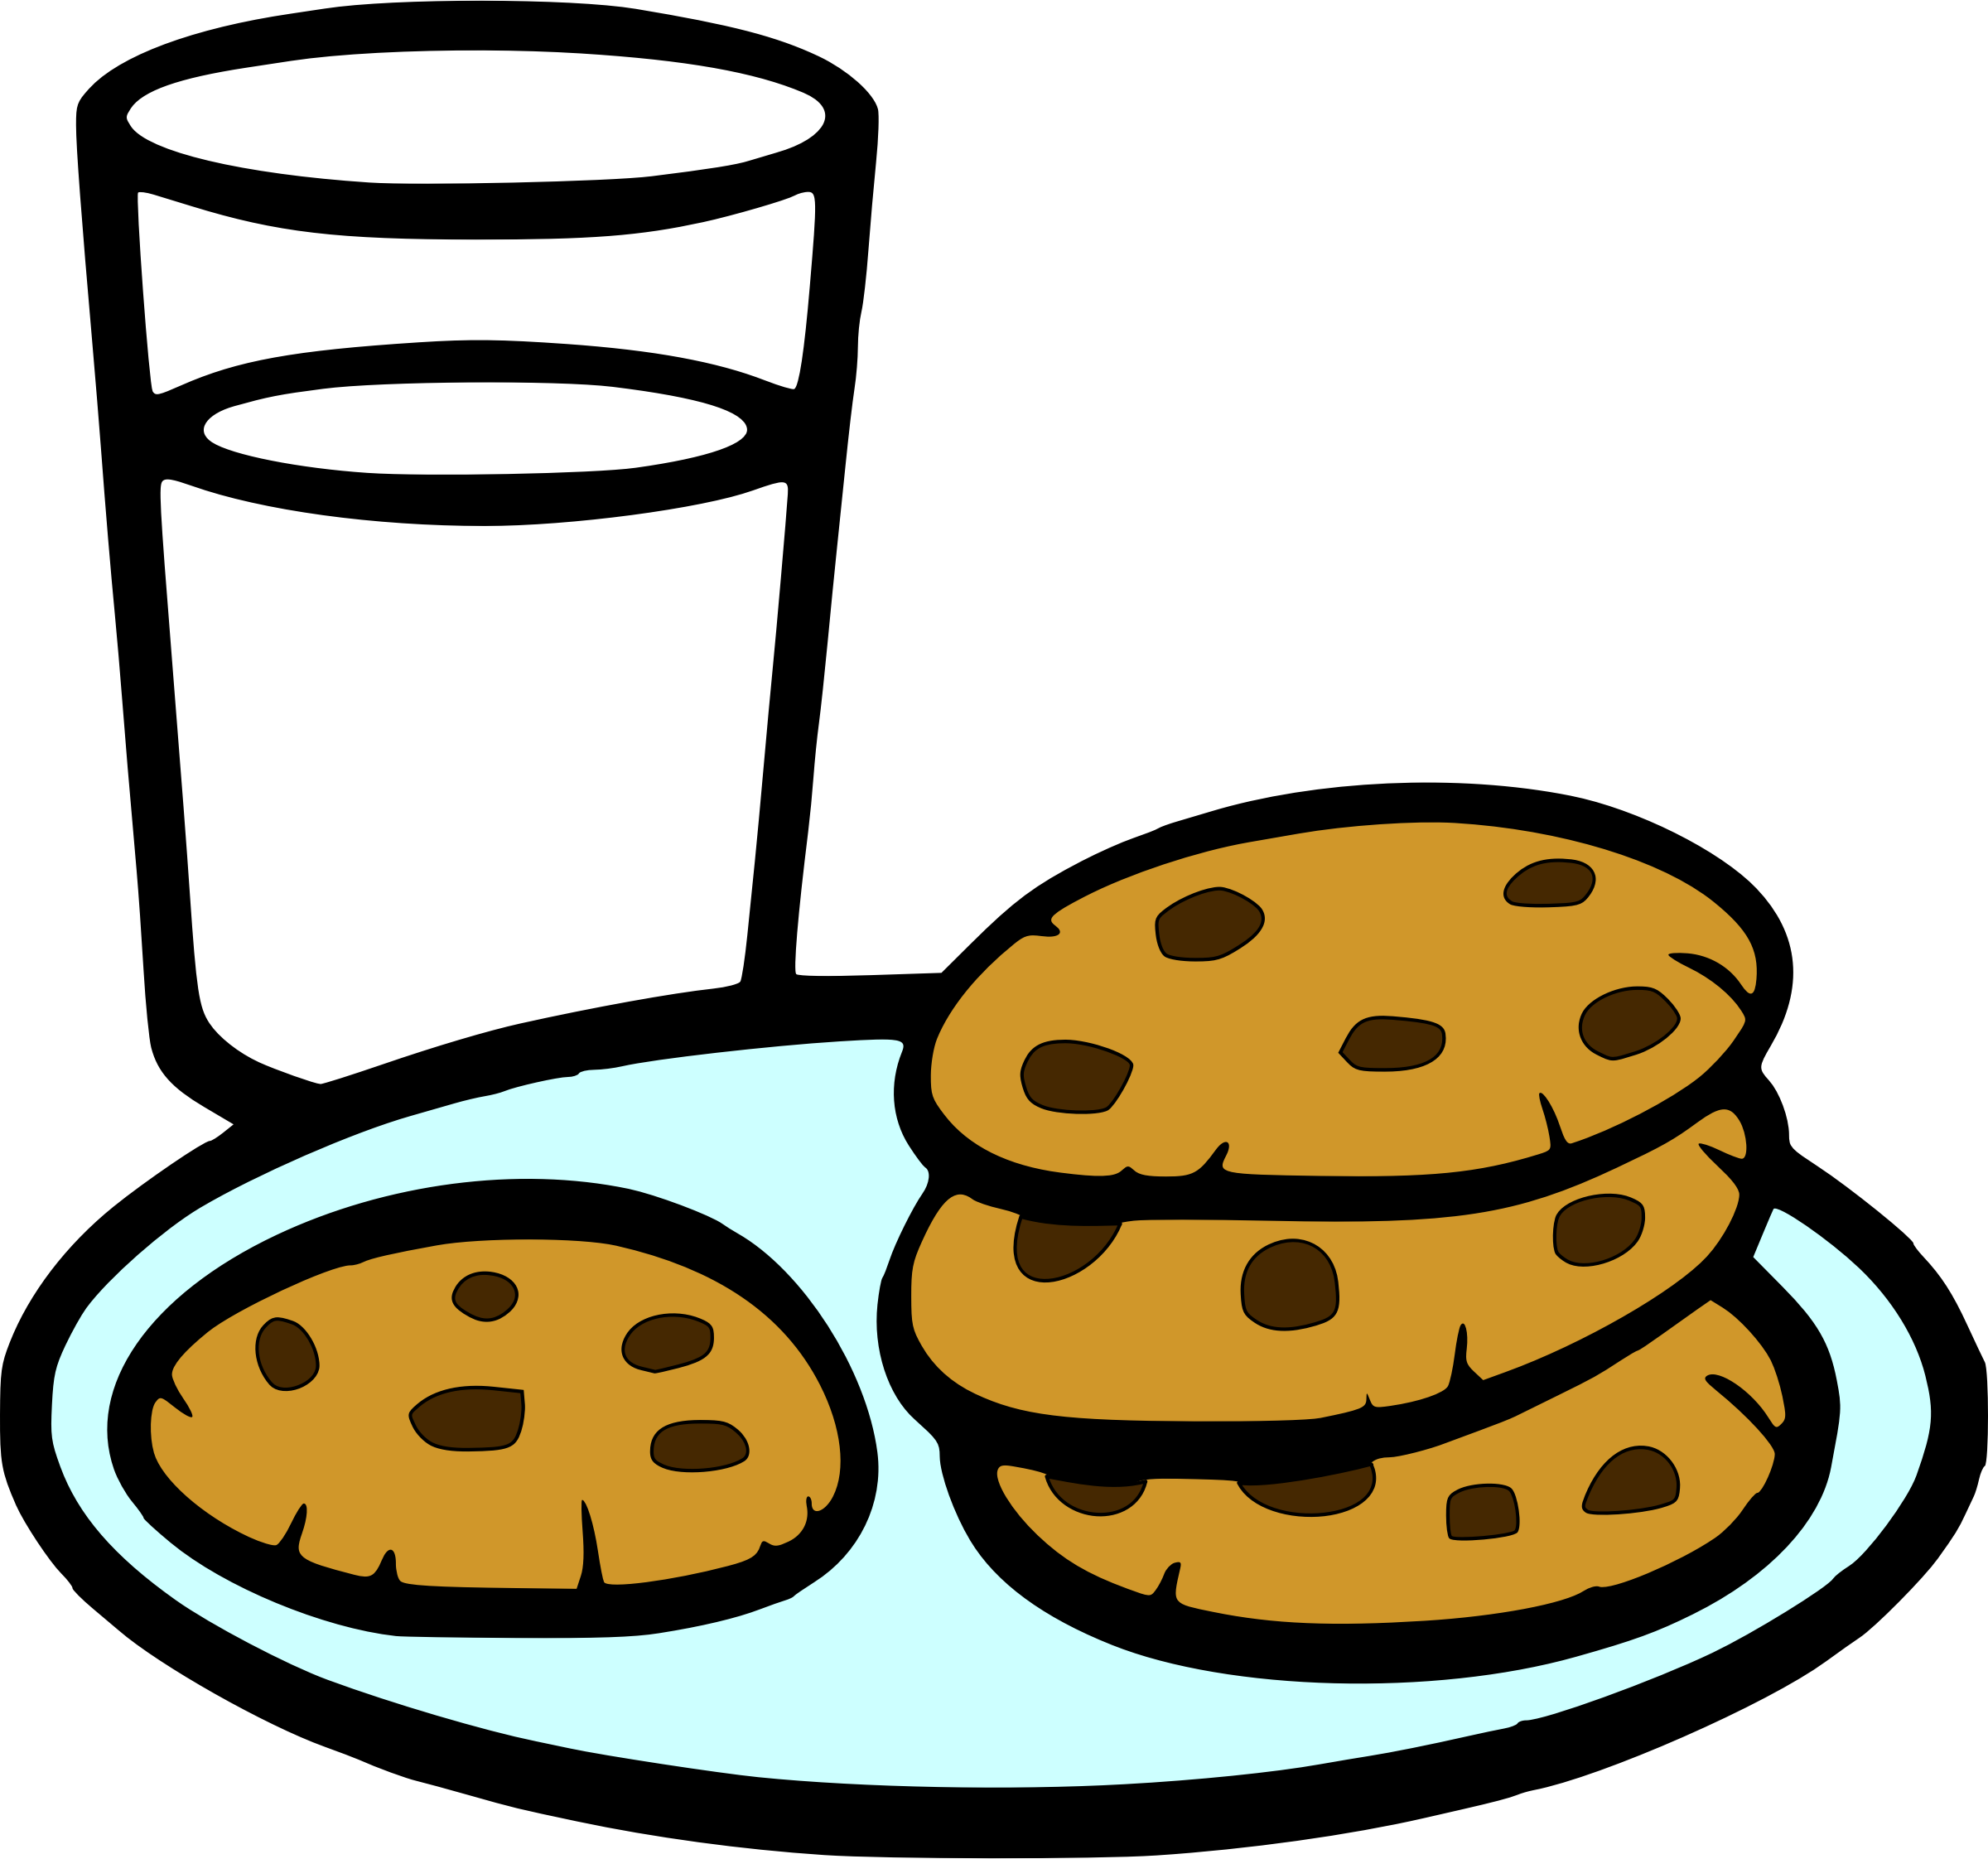 A Plate Of Cookies And A Glass Of Milk